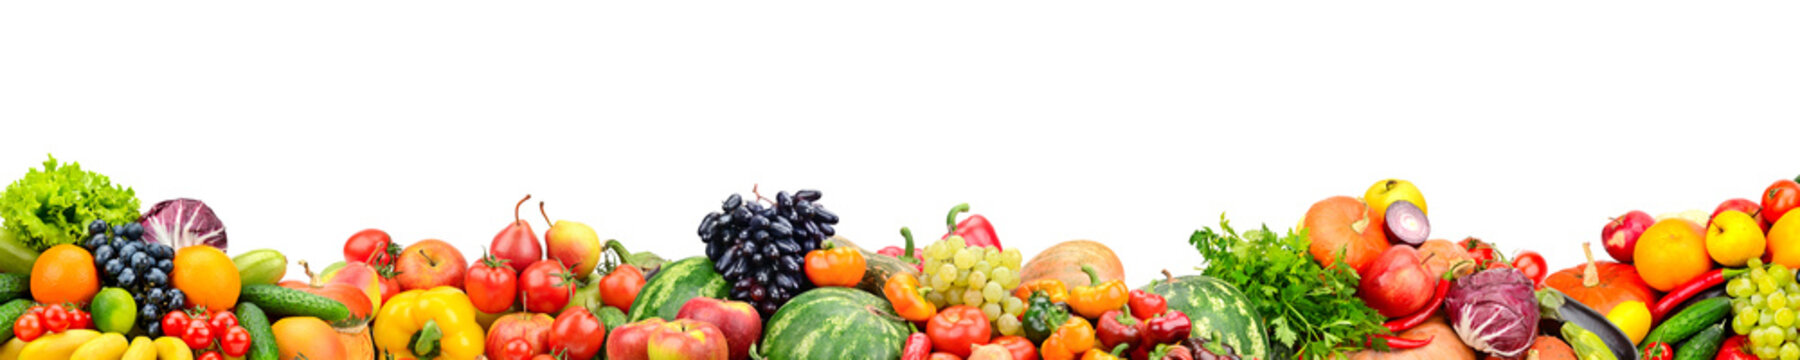 Panoramic collection fresh fruits and vegetables isolated on white